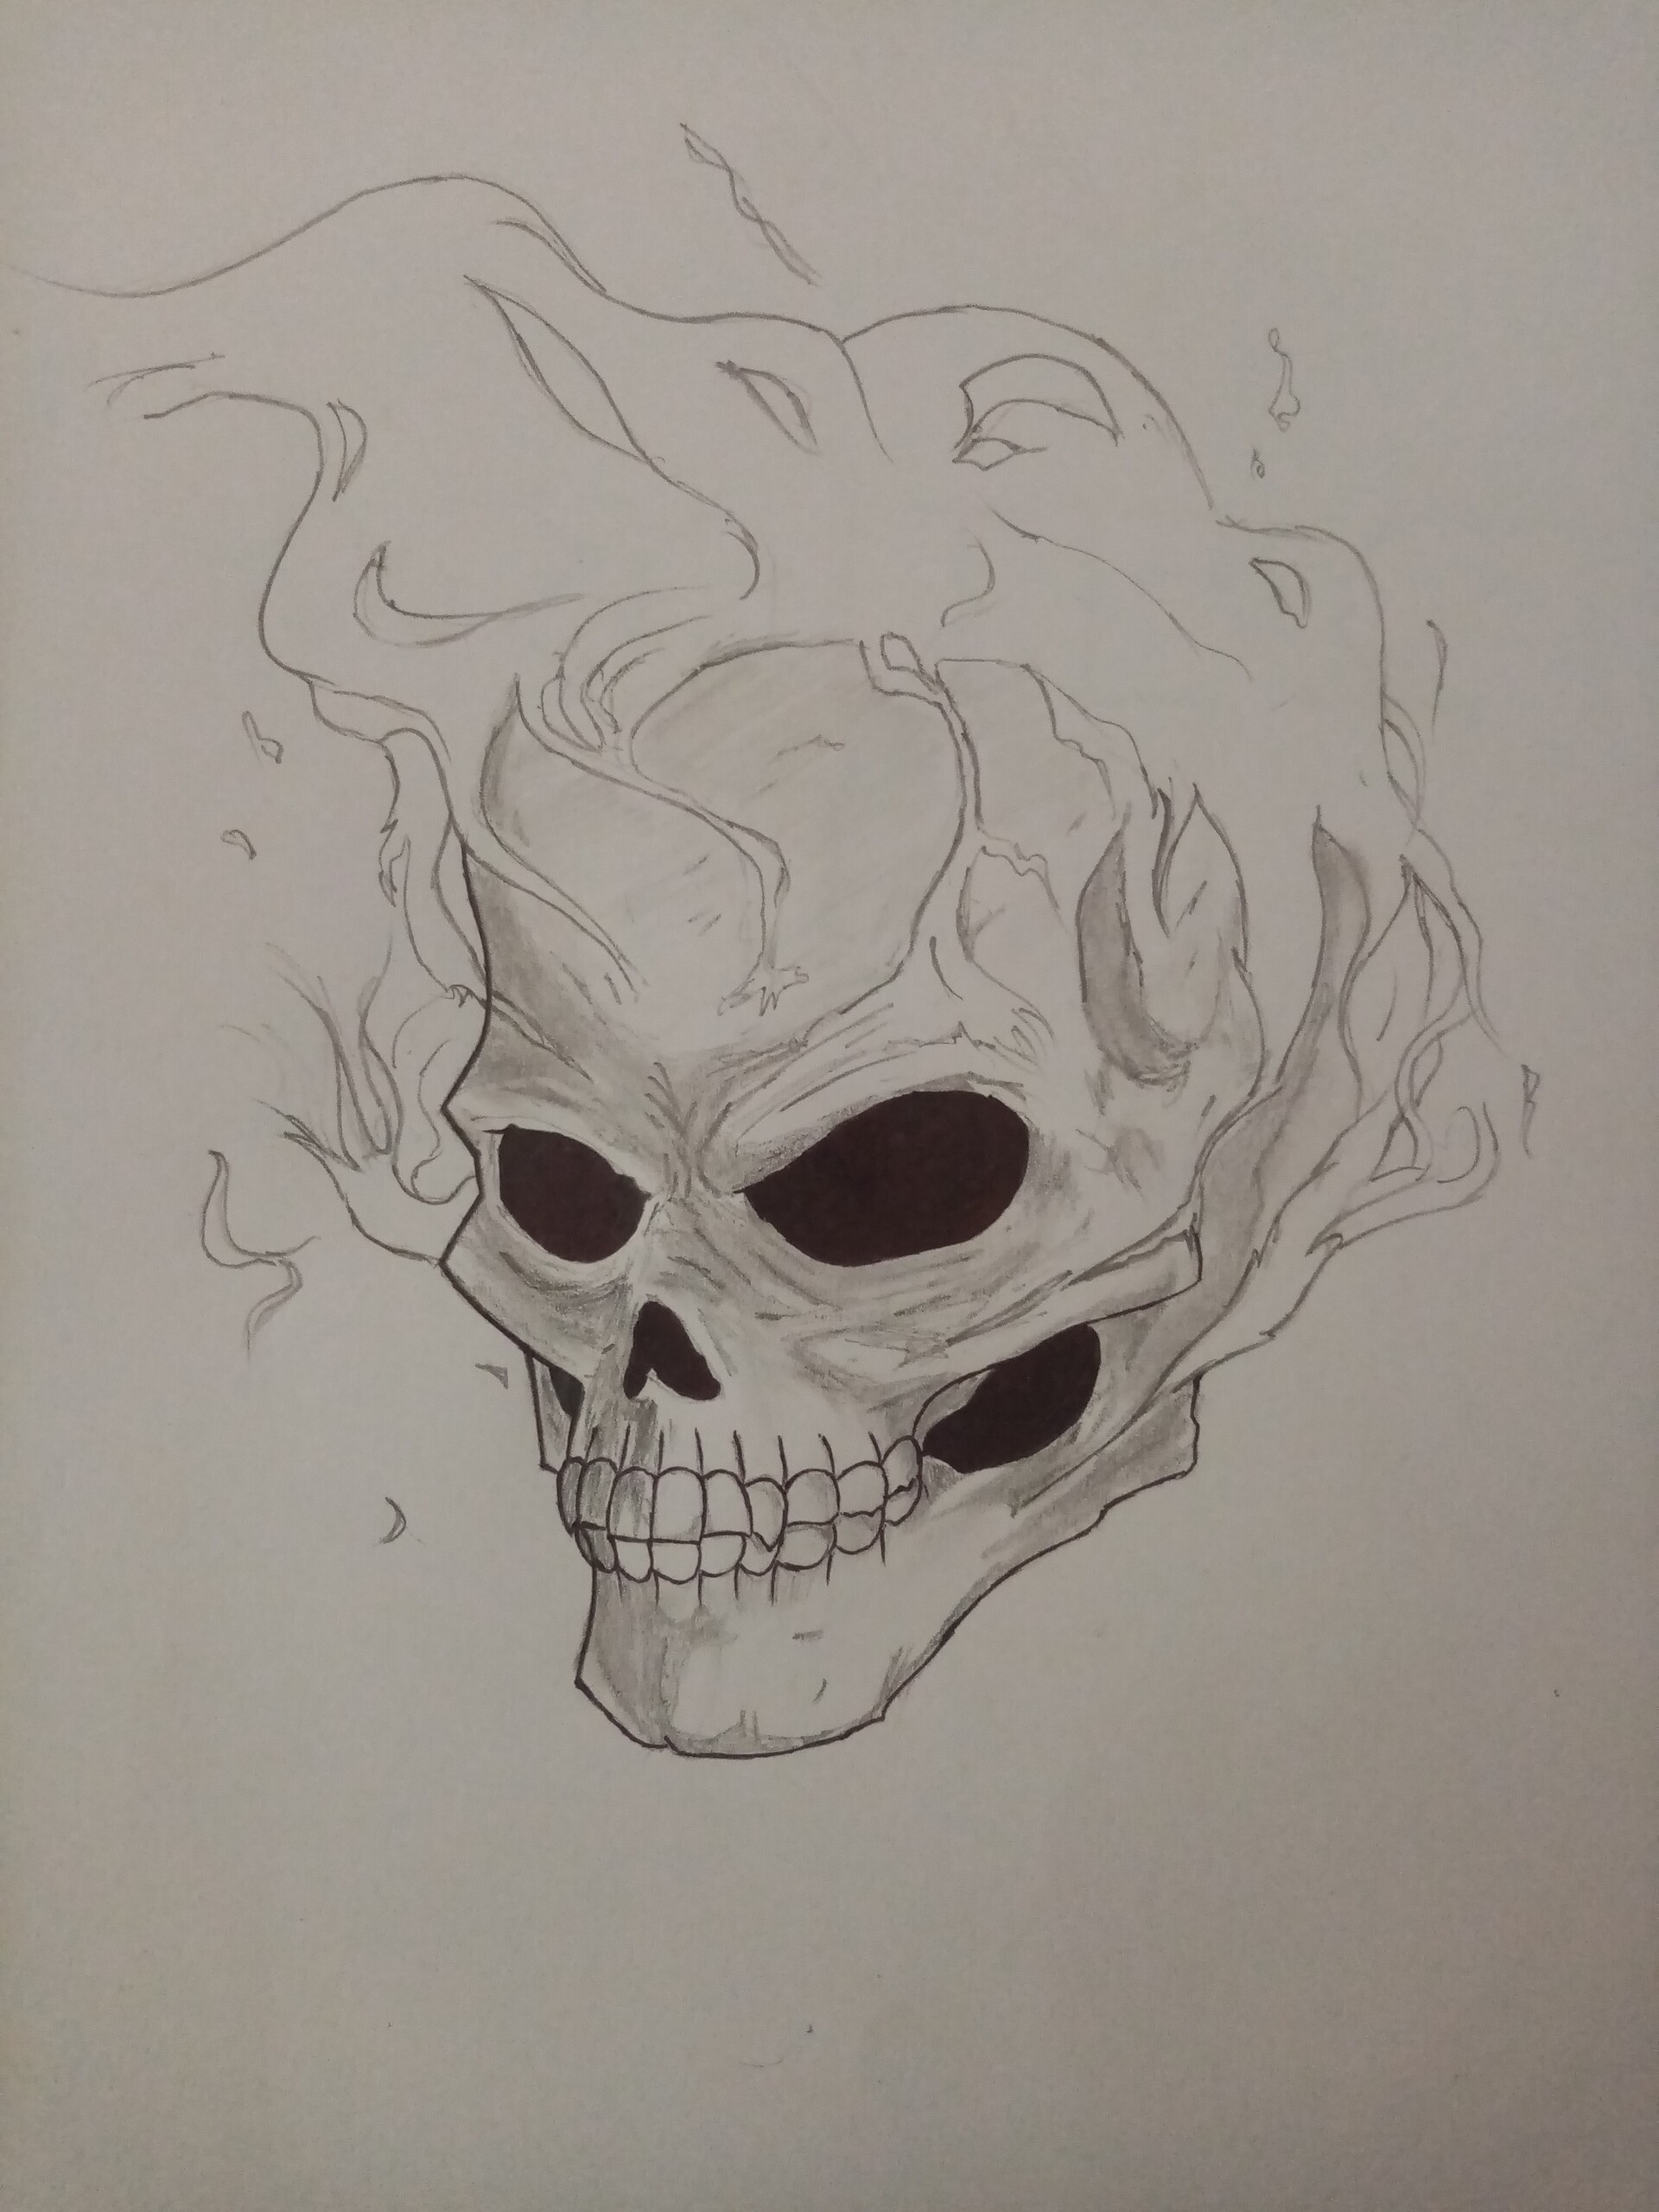 Skull and Flames : r/drawing